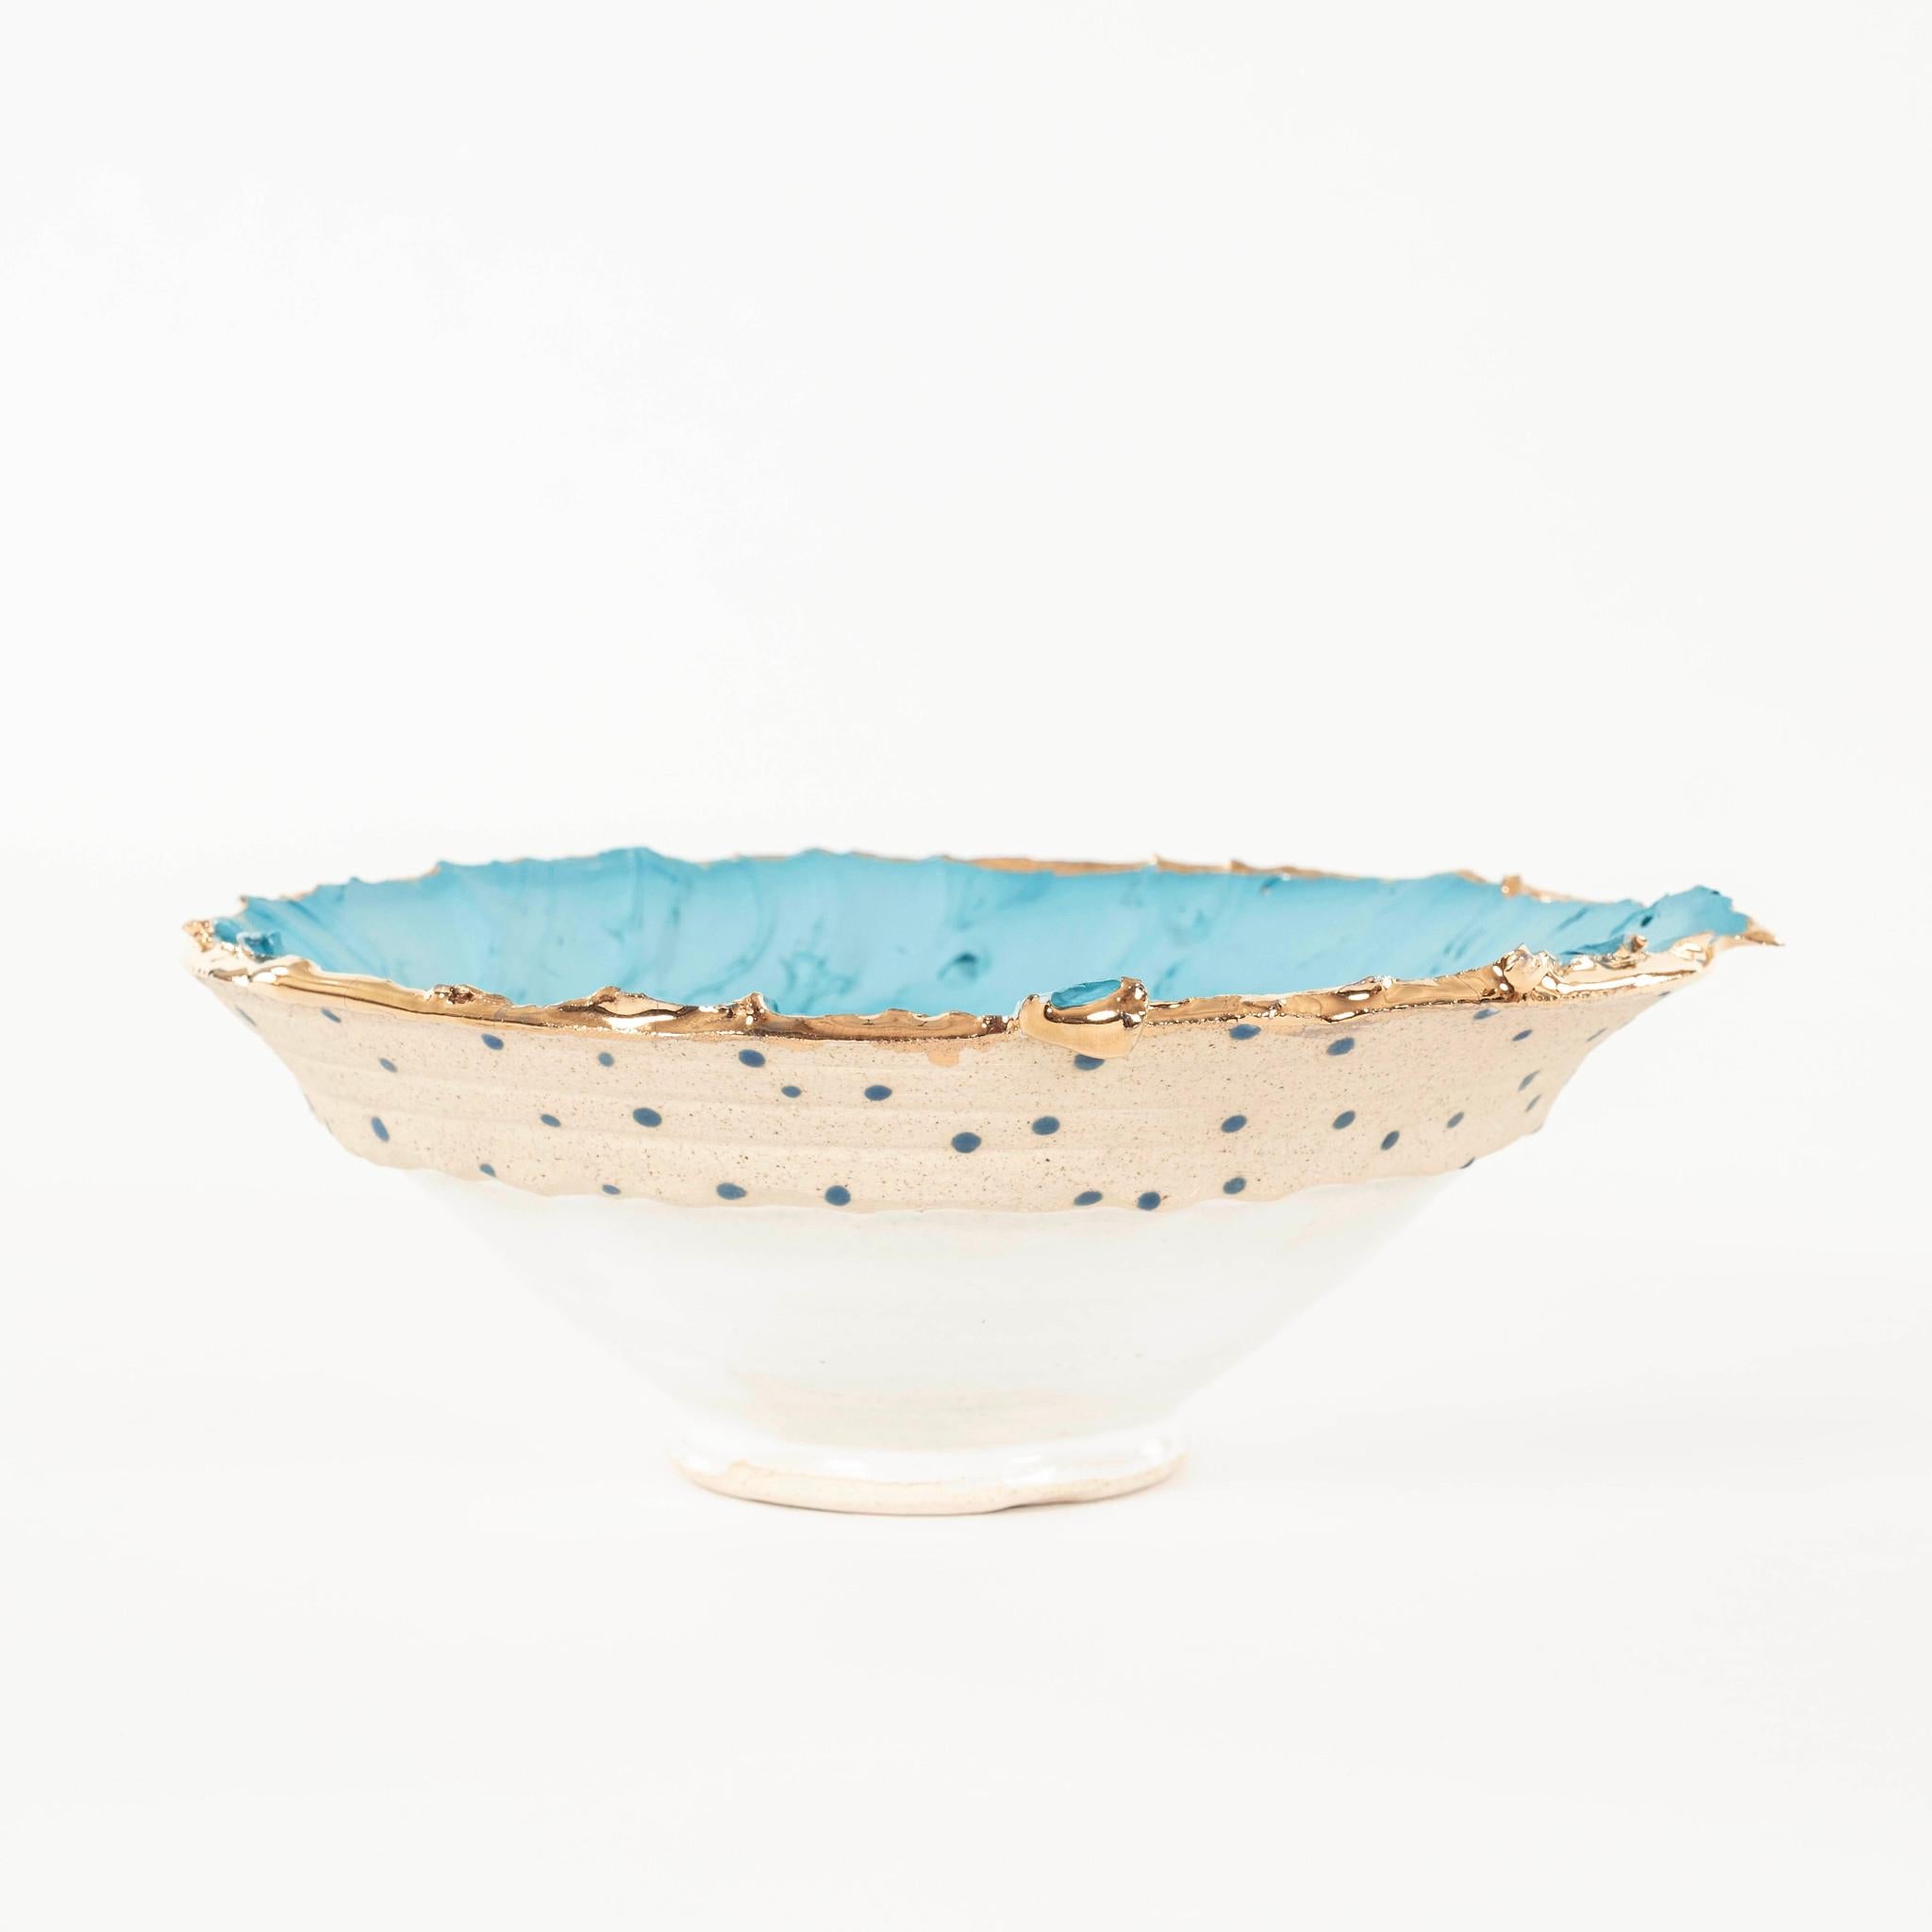 Bleu Patisse Confetti Porcelain Bowl Chase Gamblin In Excellent Condition For Sale In Houston, TX